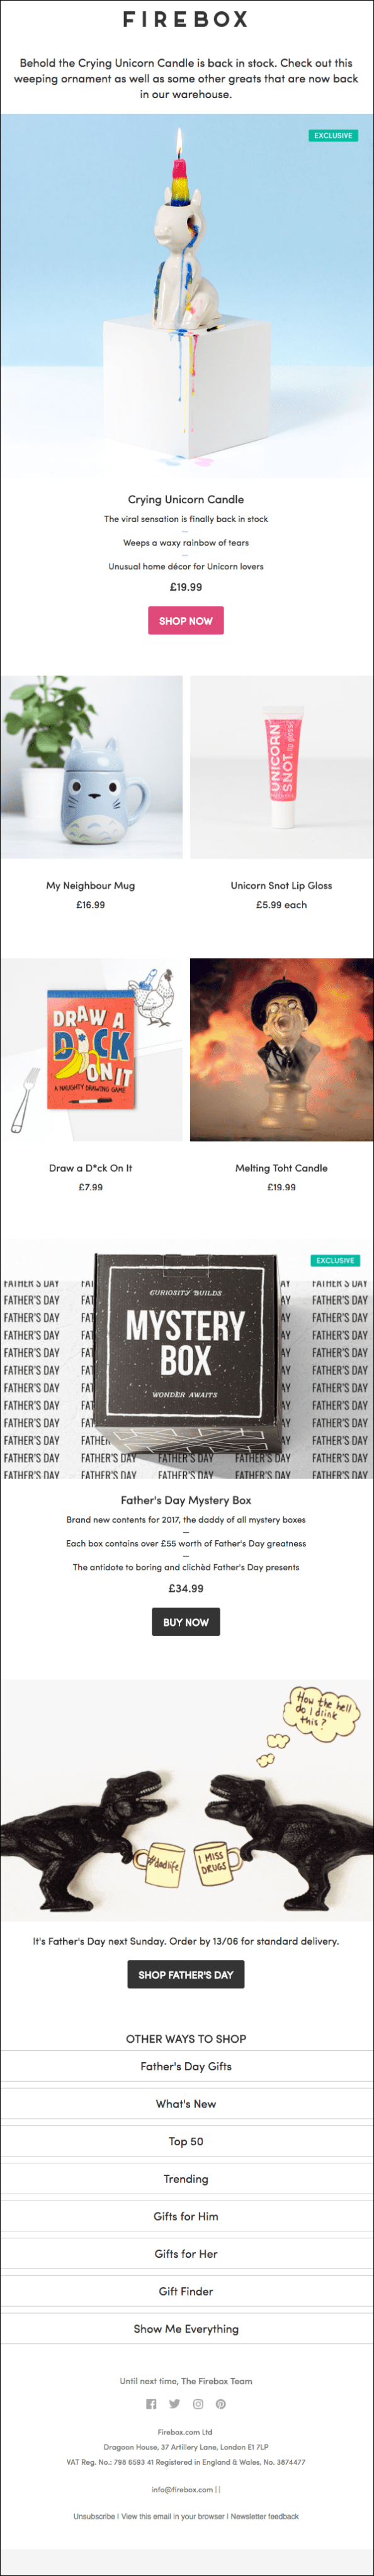 Firebox Back-in-stock email example